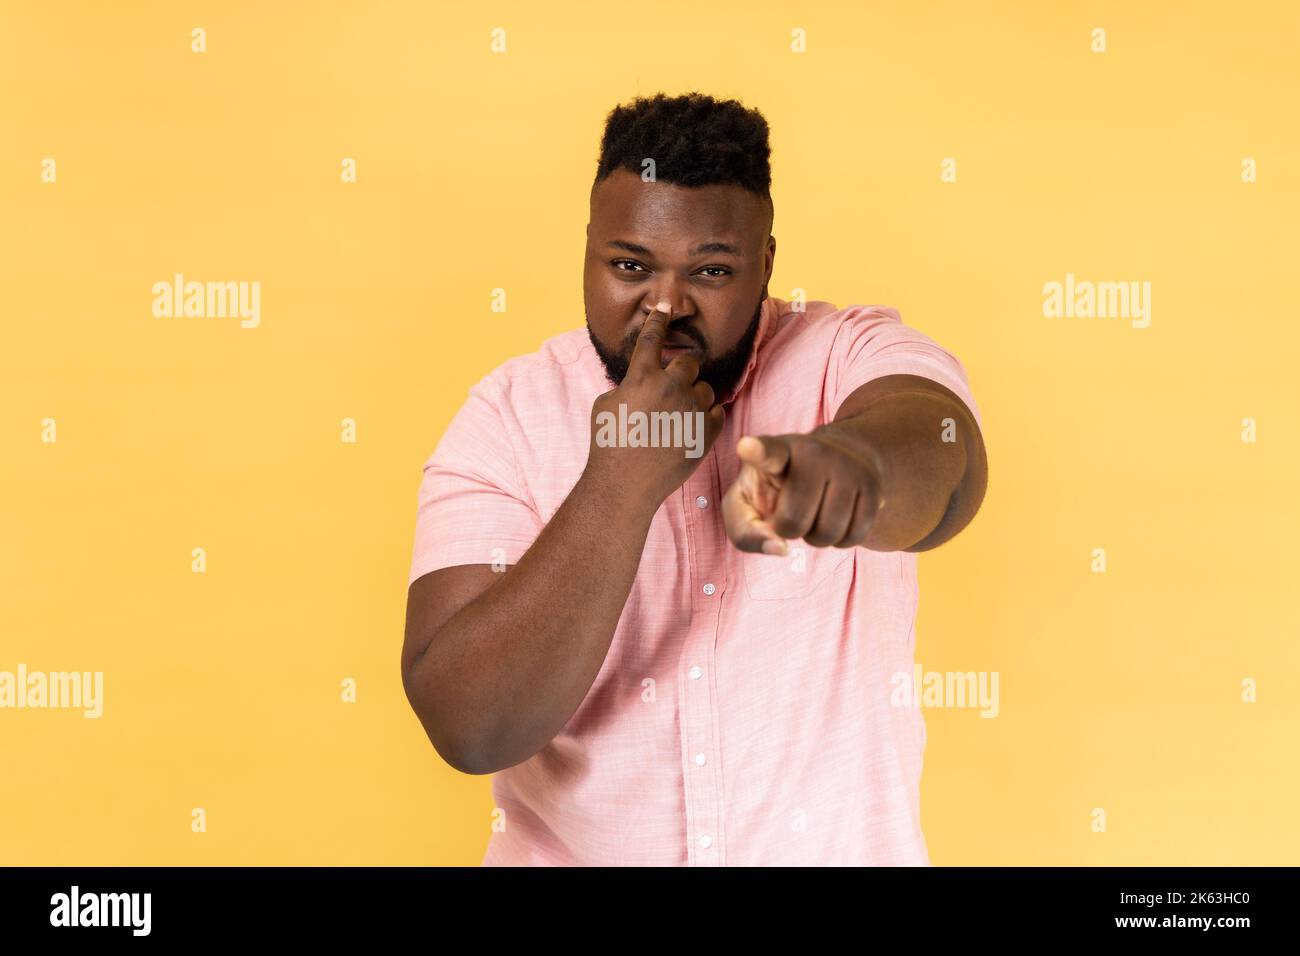 You are liar. Portrait of man wearing pink shirt standing with finger on her nose and showing lie gesture, pointing to camera. Indoor studio shot isolated on yellow background. Stock Photo